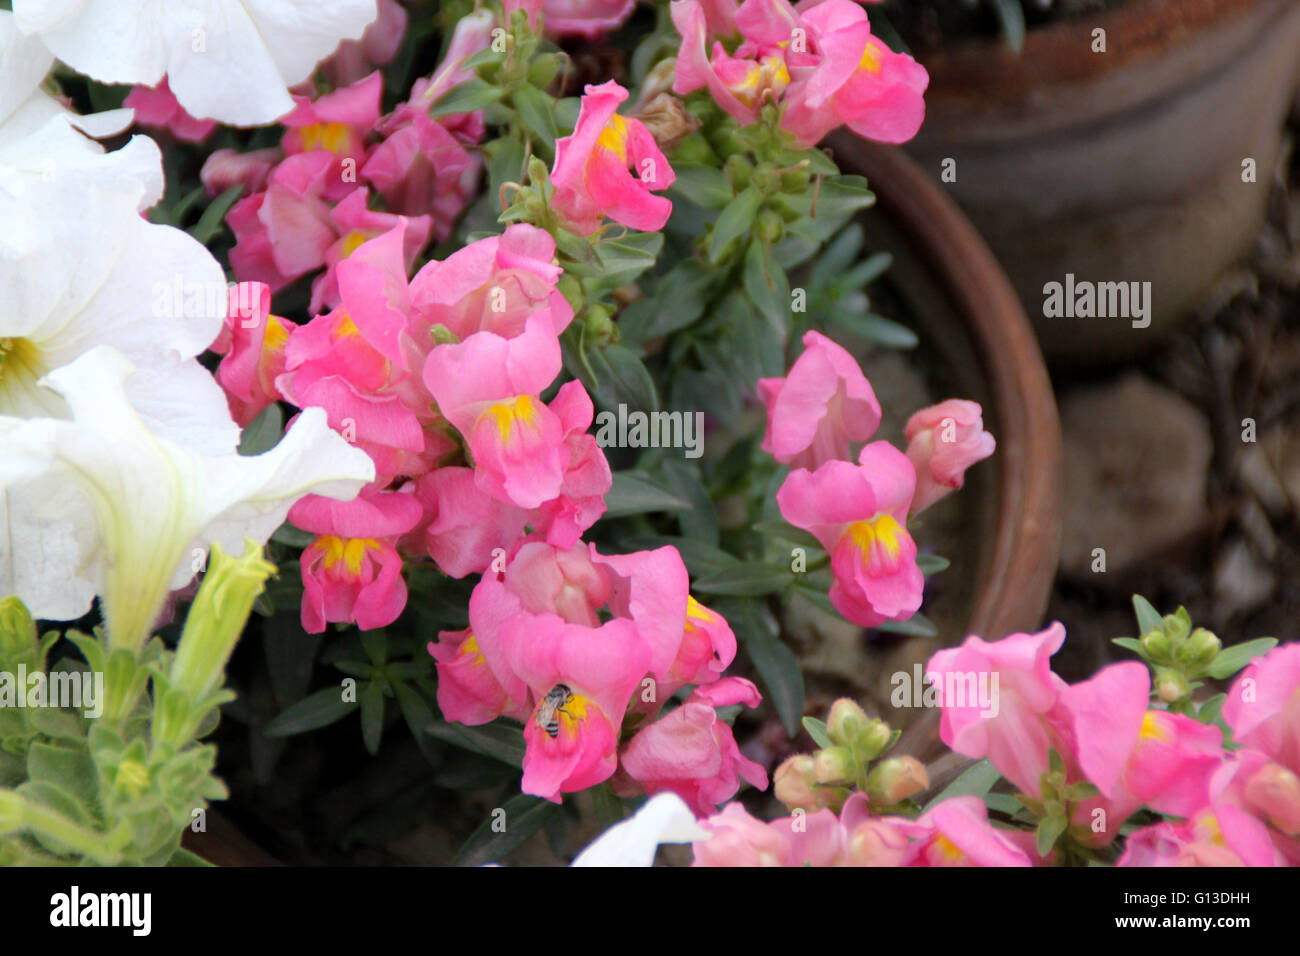 Antirrhinum majus, Snapdragon, ornamental herb with broadly lanceolate leaves and 2 lipped flowers in terminal spikes Stock Photo